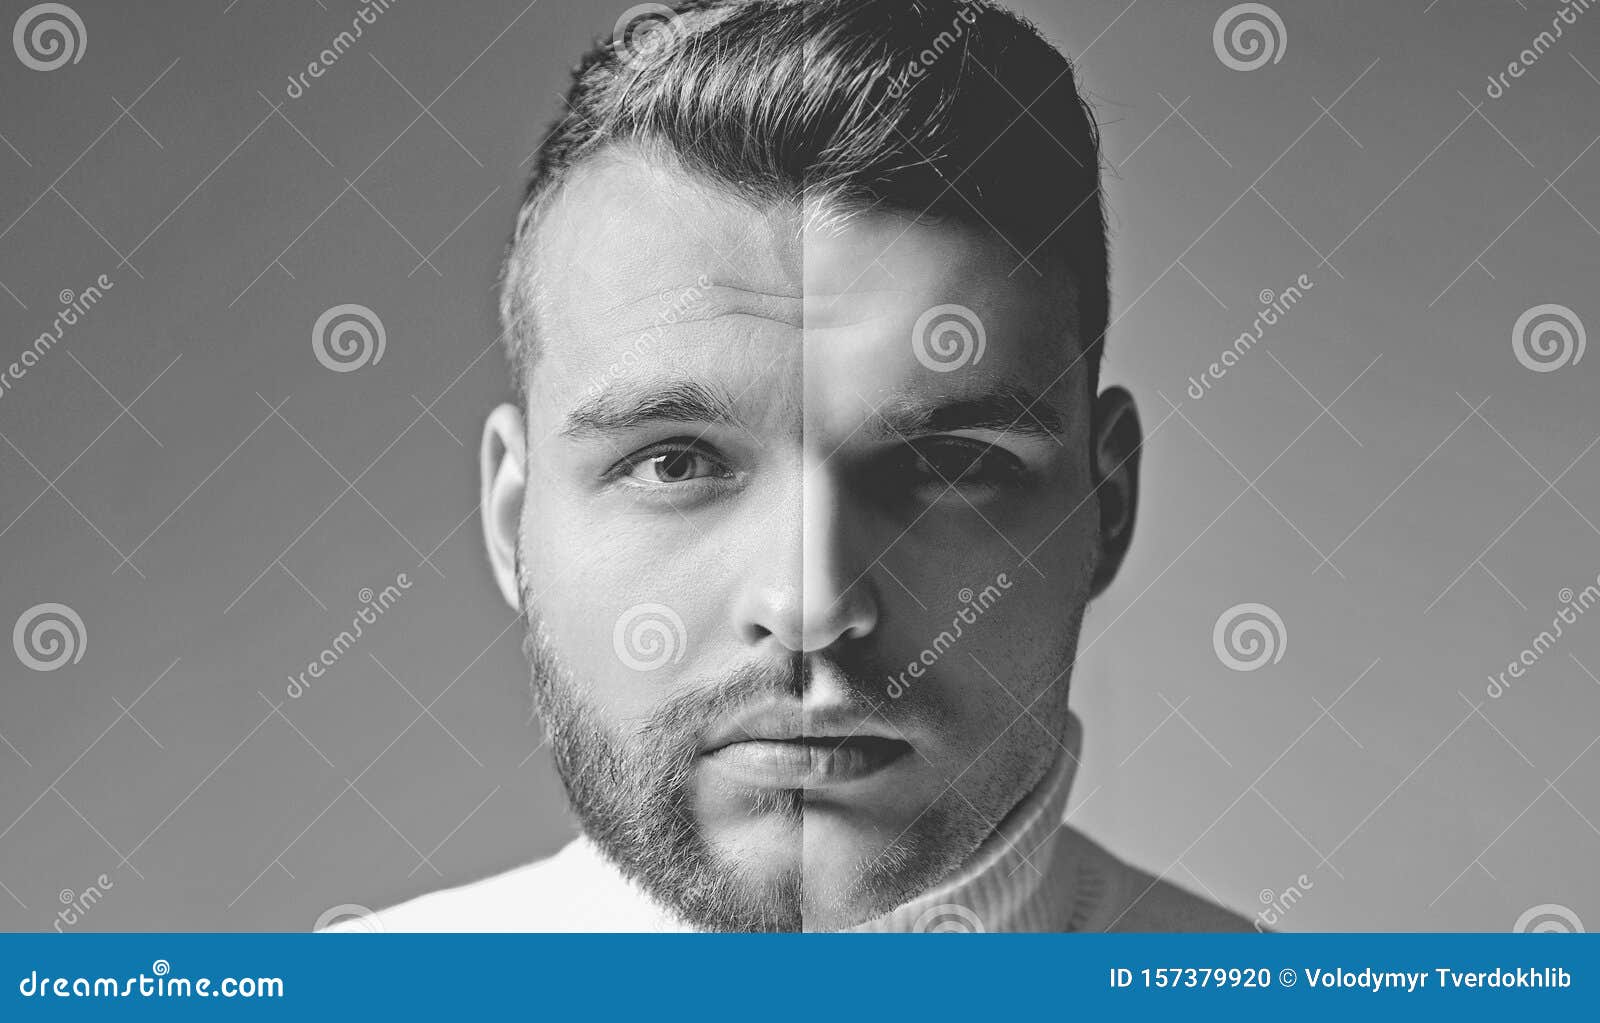 shaven vs unshaven man - set. after or before shaven. set of bearded man. hair style hair stylist for handsome man